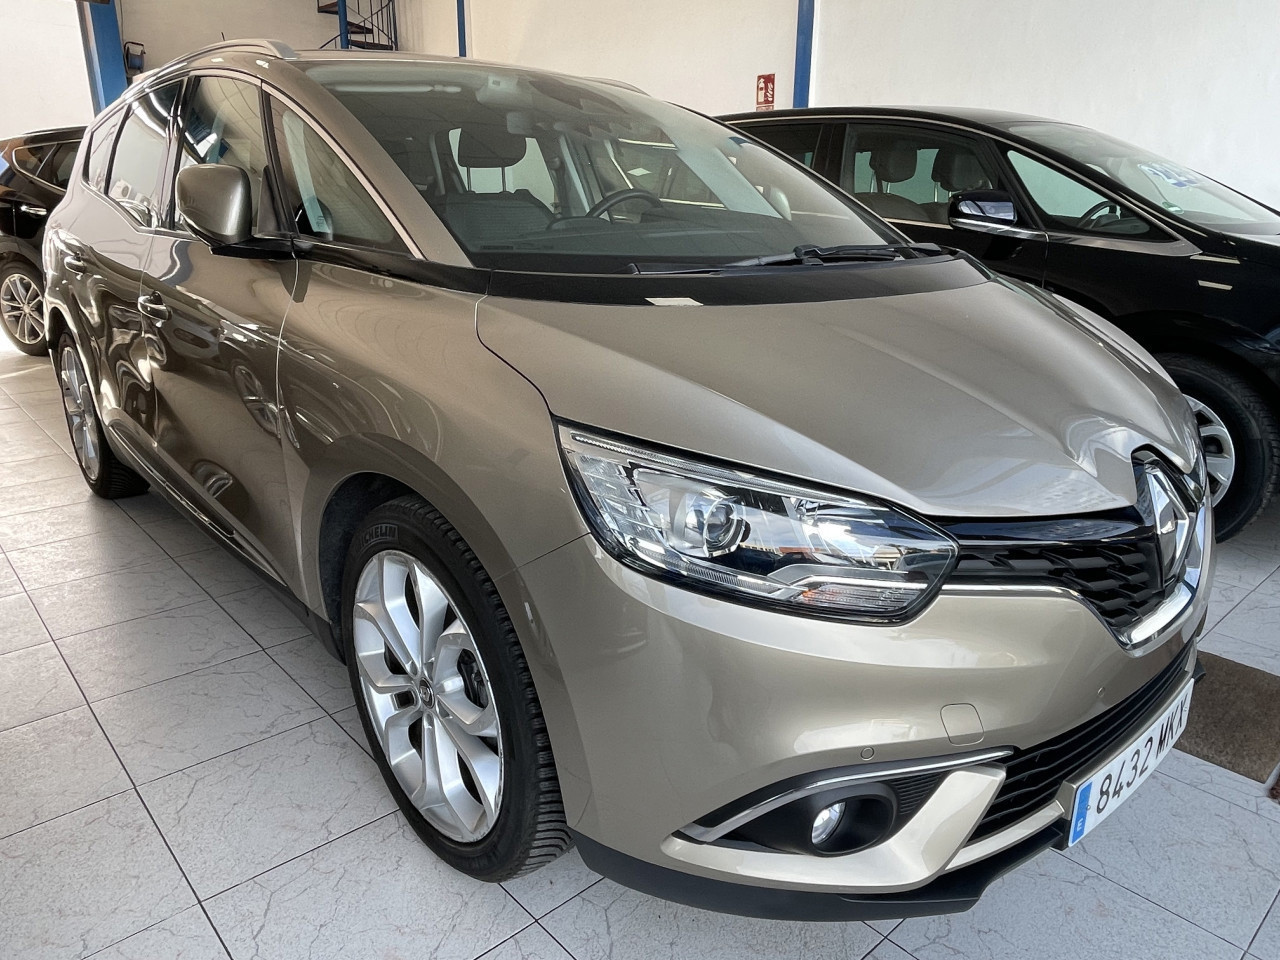 Renault Grand Scenic 1.5 Dci Automatic People carrier Photo